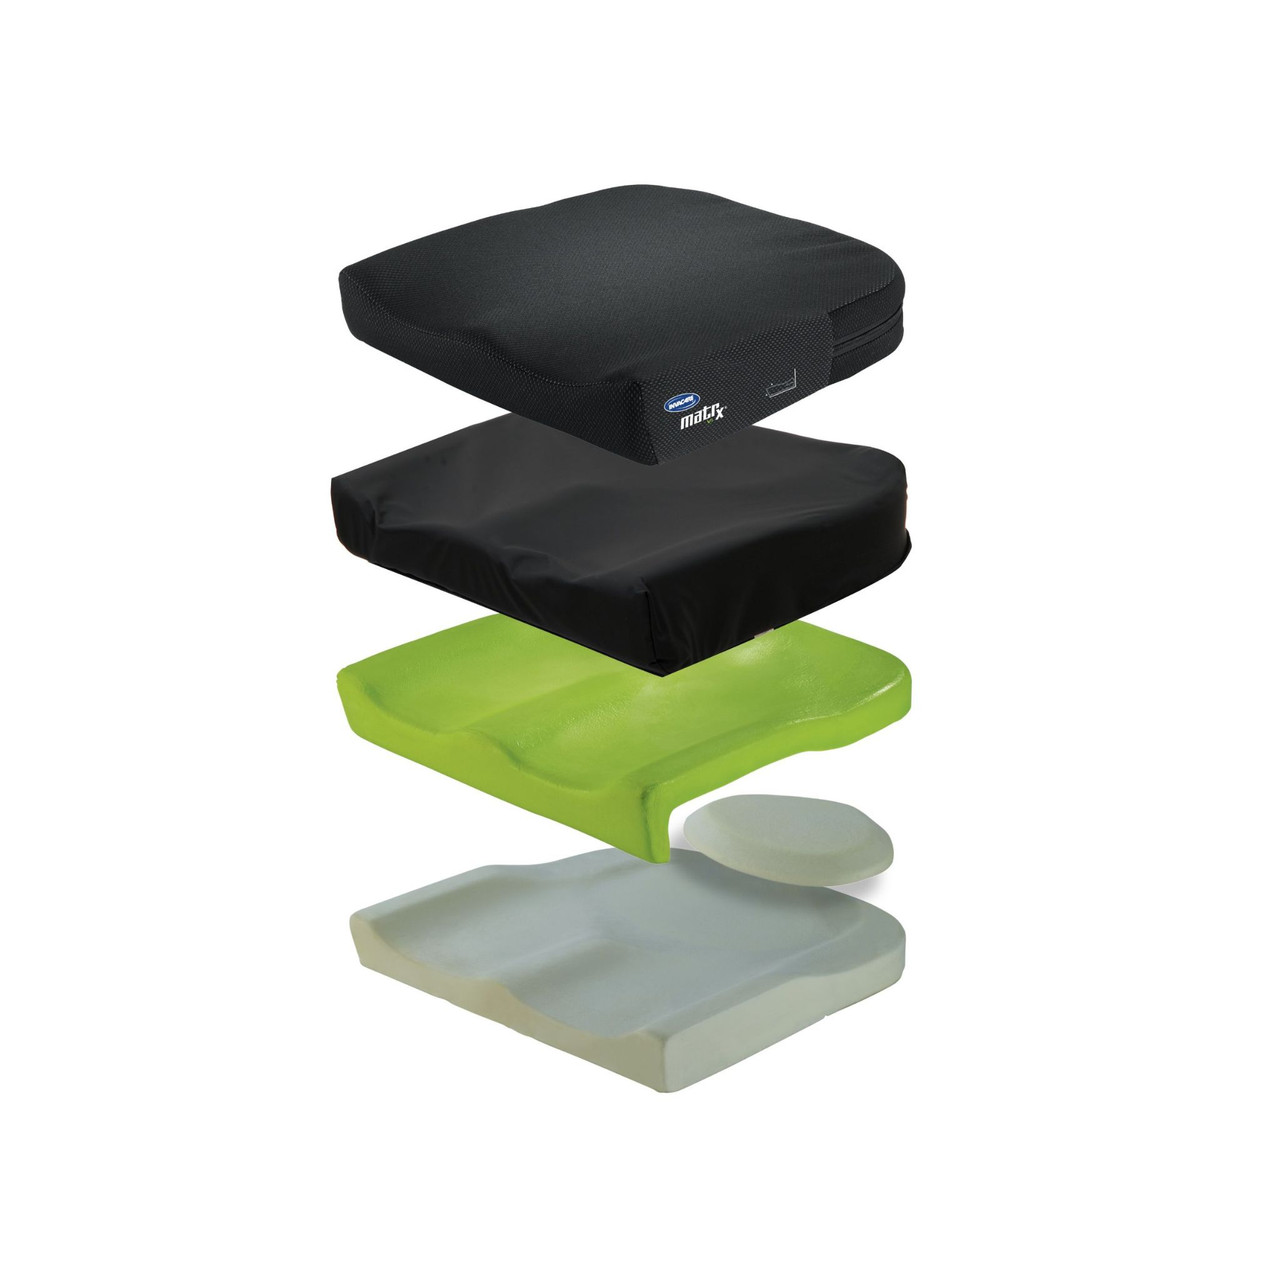 ADJUSTABLE LATERAL POSITIONING CUSHION